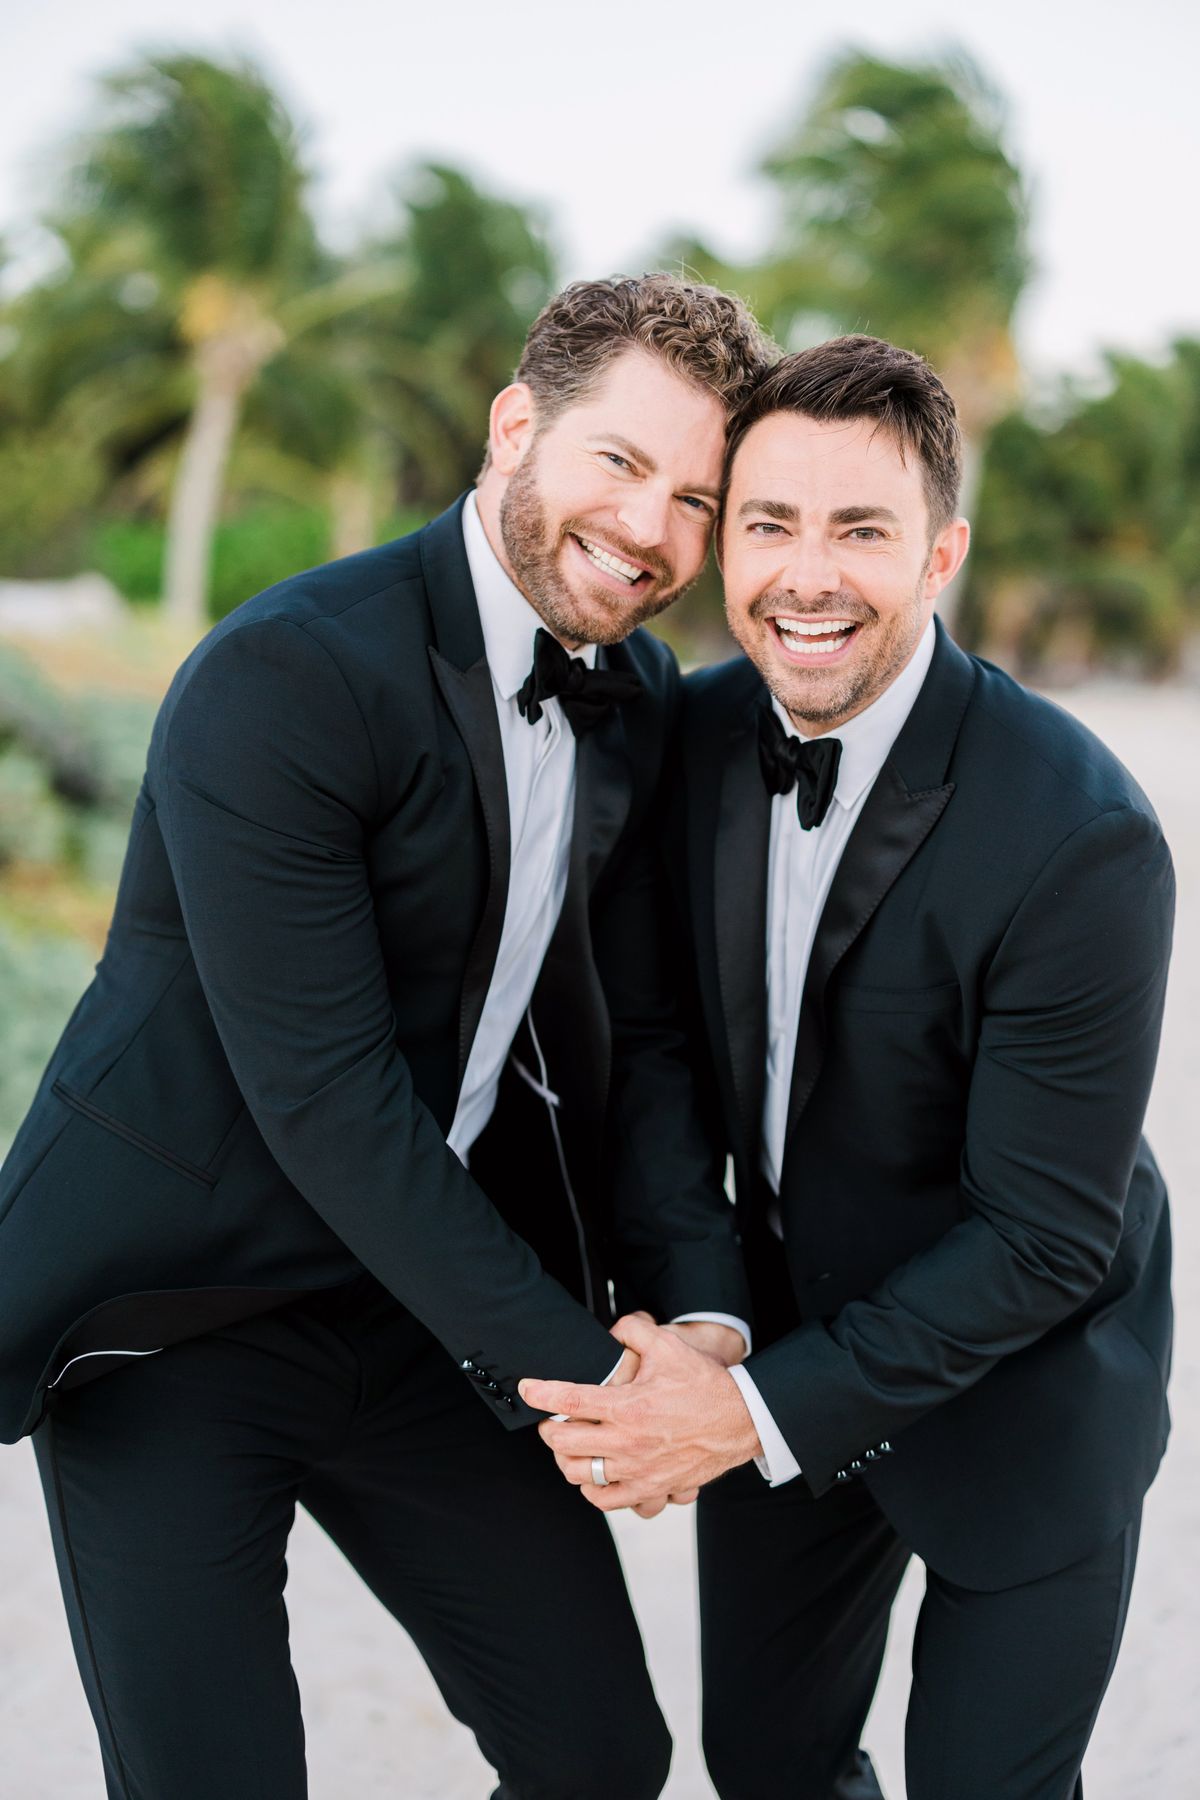 
Two Kings, One Kingdom: Jaymes Vaughan and Jonathan Bennett’s Inspiring Approach to Marriage
